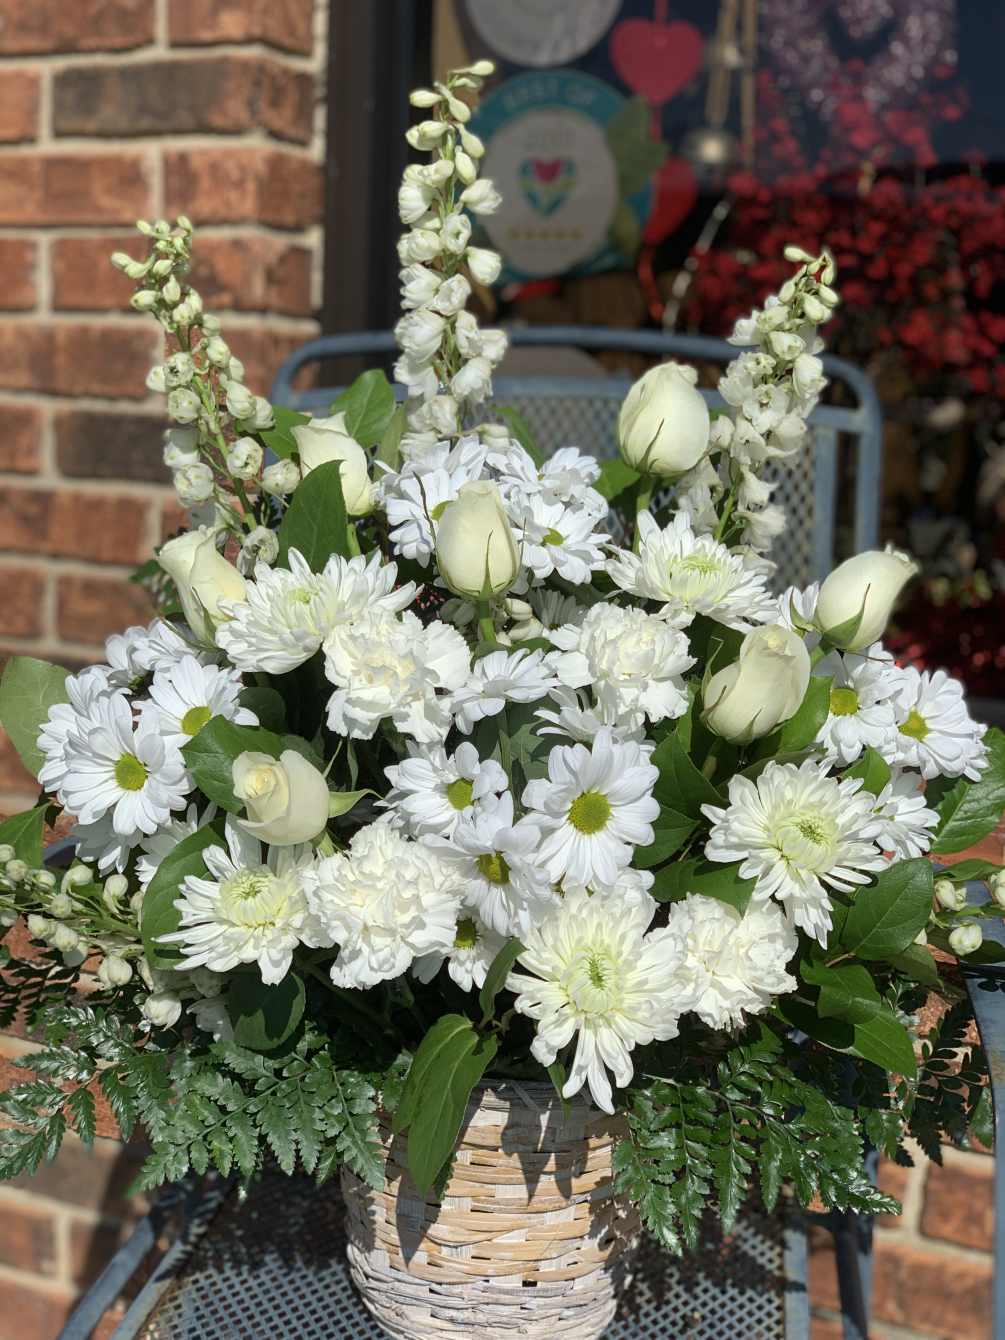 Share how much you care with an abundance of elegant white florals.